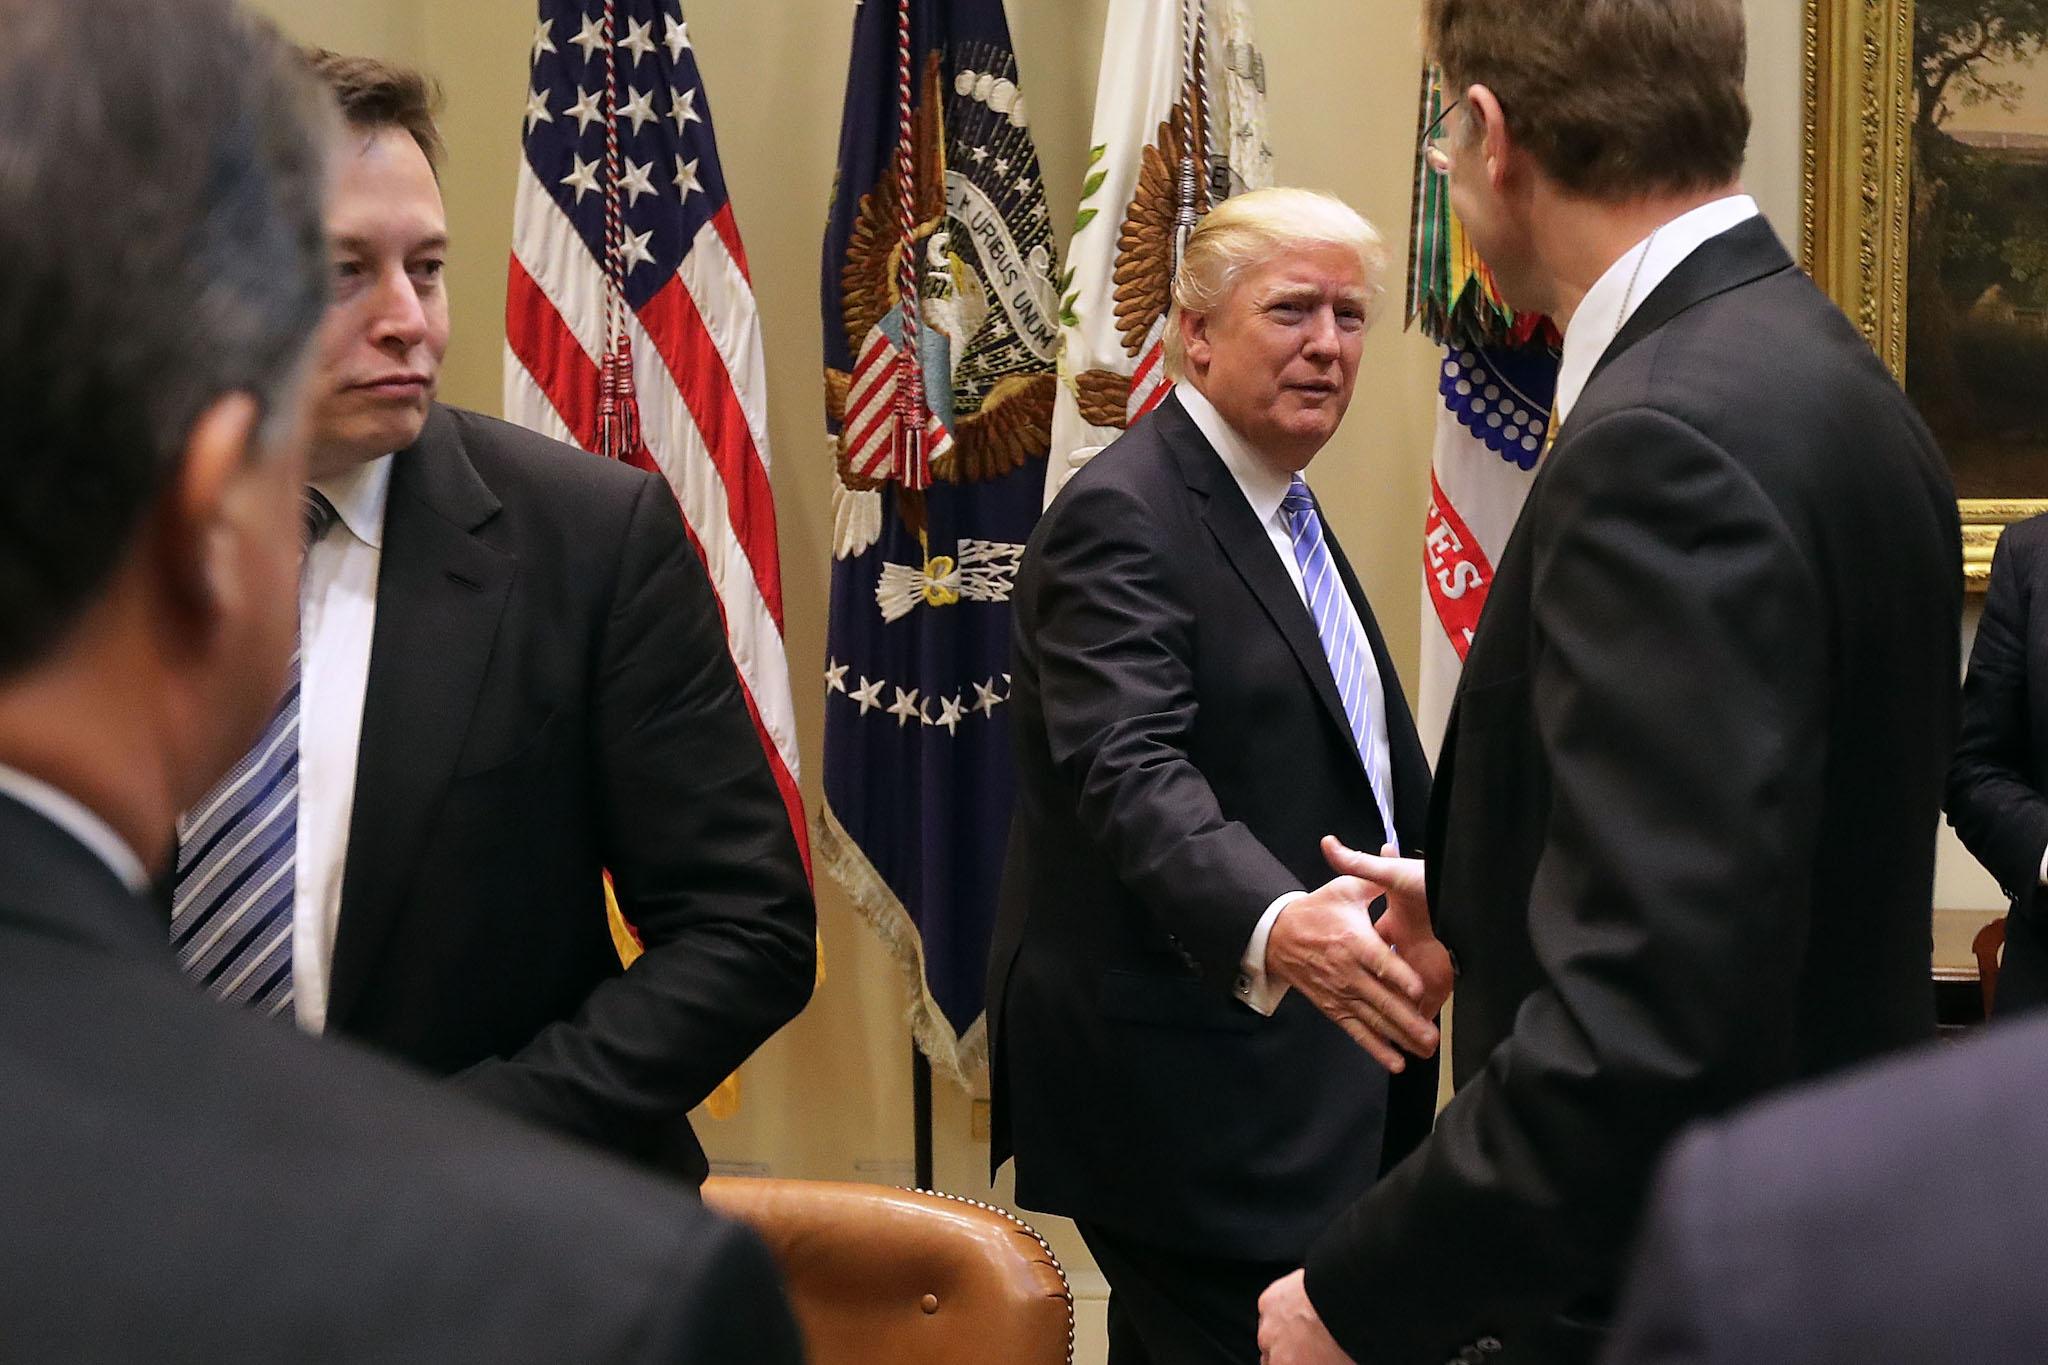 Donald Trump meets Elon Musk and other other business leaders as he arrives for a meeting in the Roosevelt Room at the White House